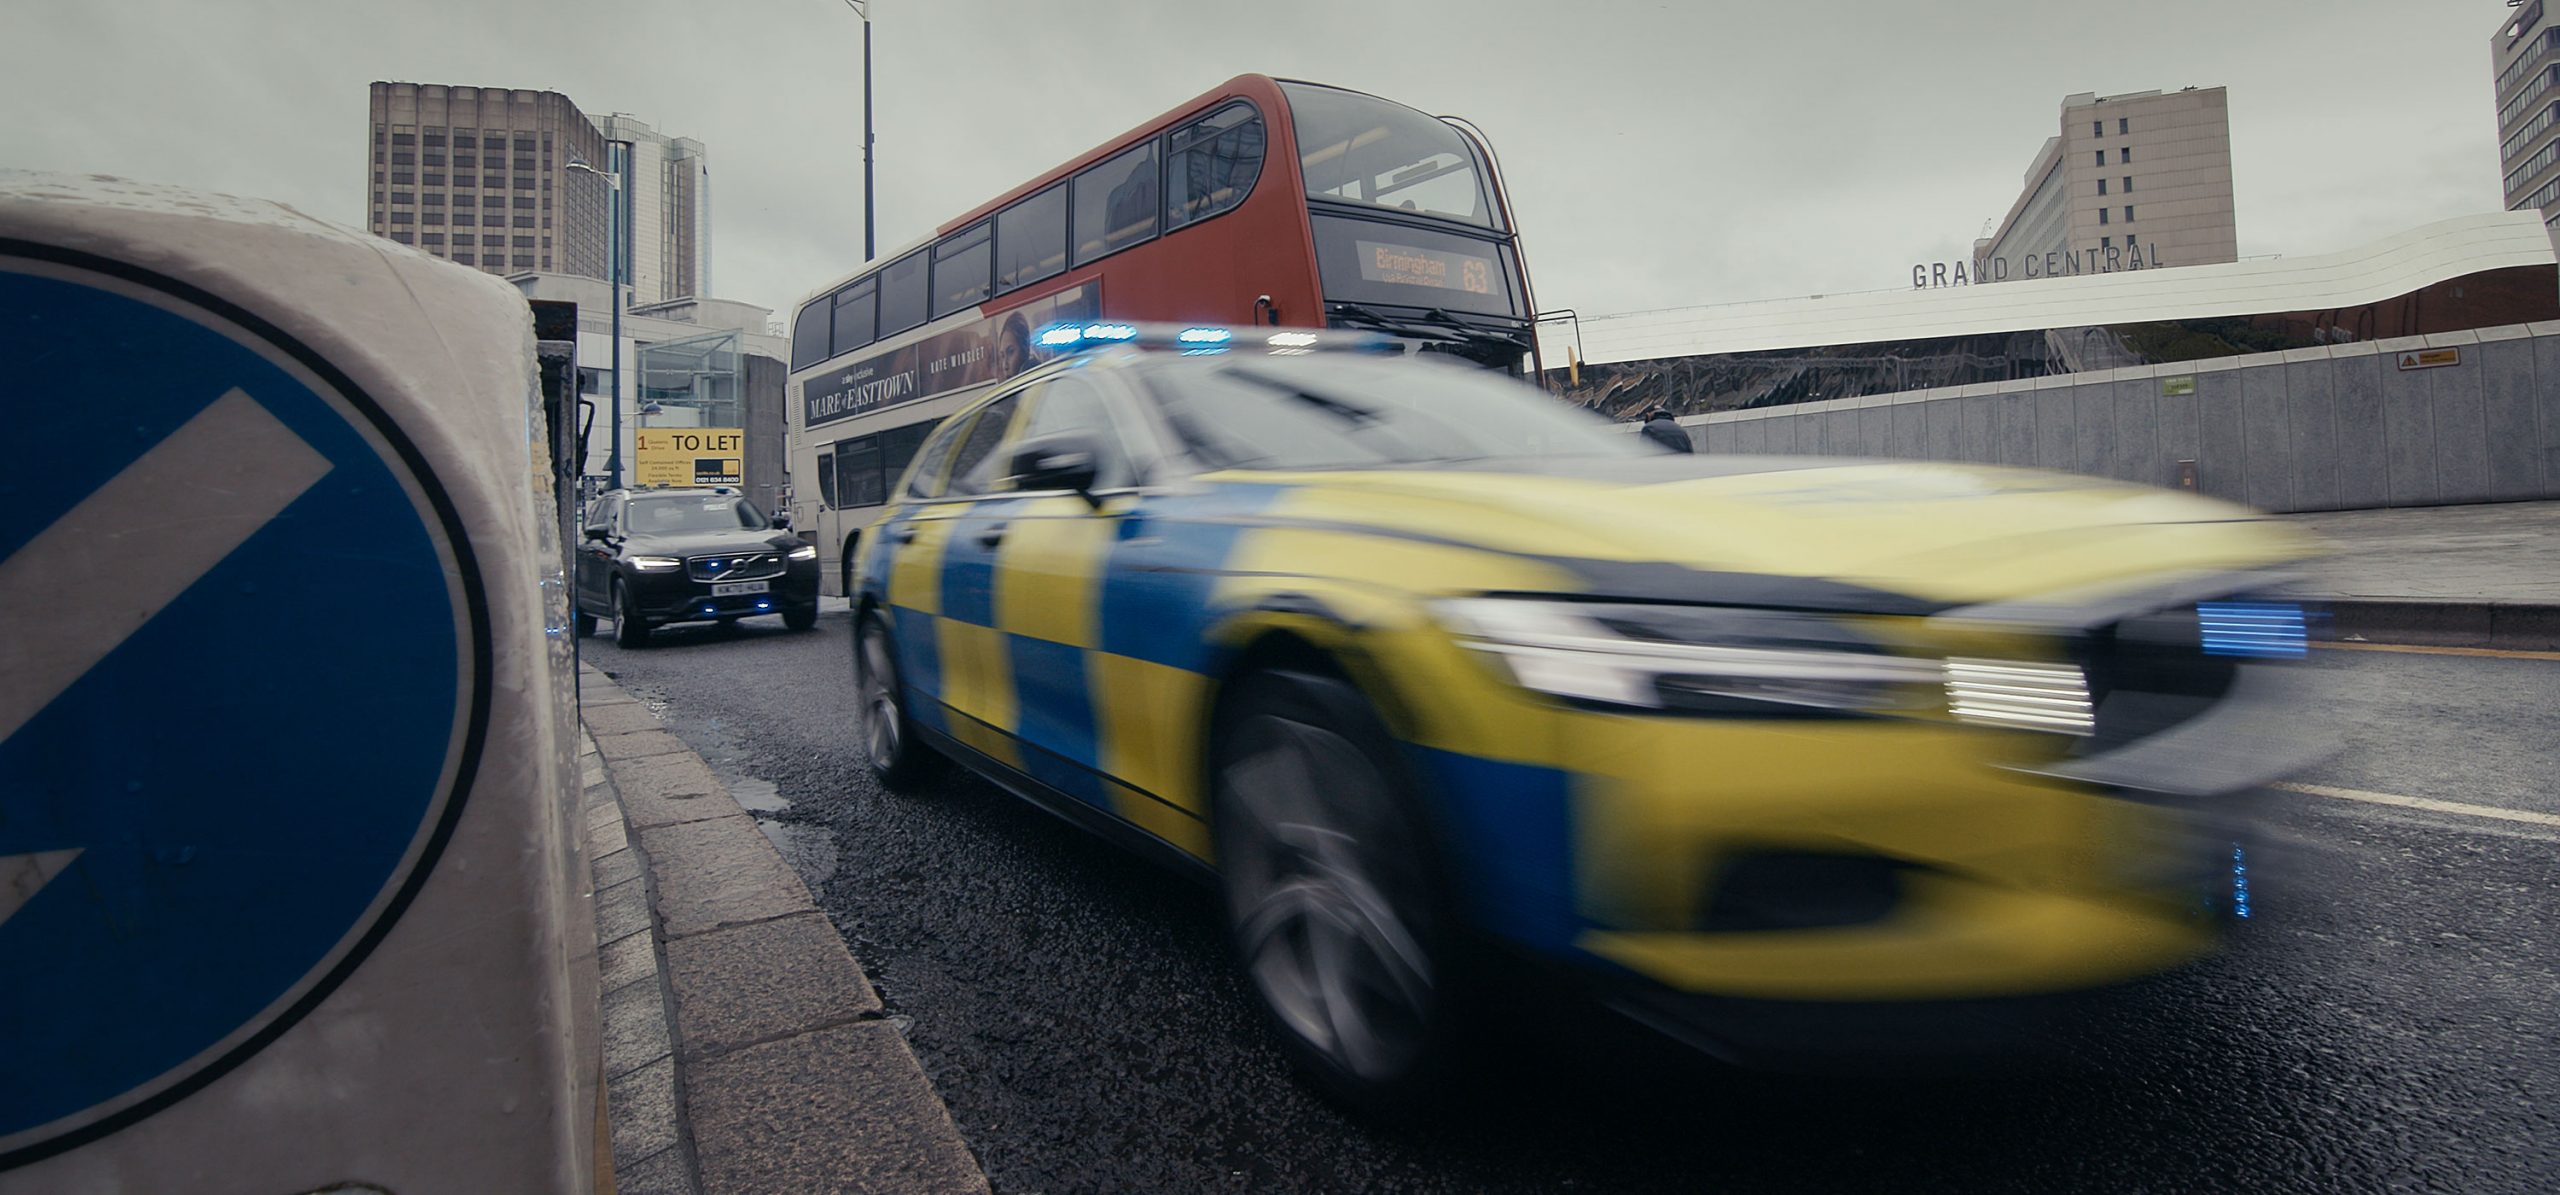 Hero Image Police Car on Road Is Driving Past with Motion Blur, Bus and Car in Background